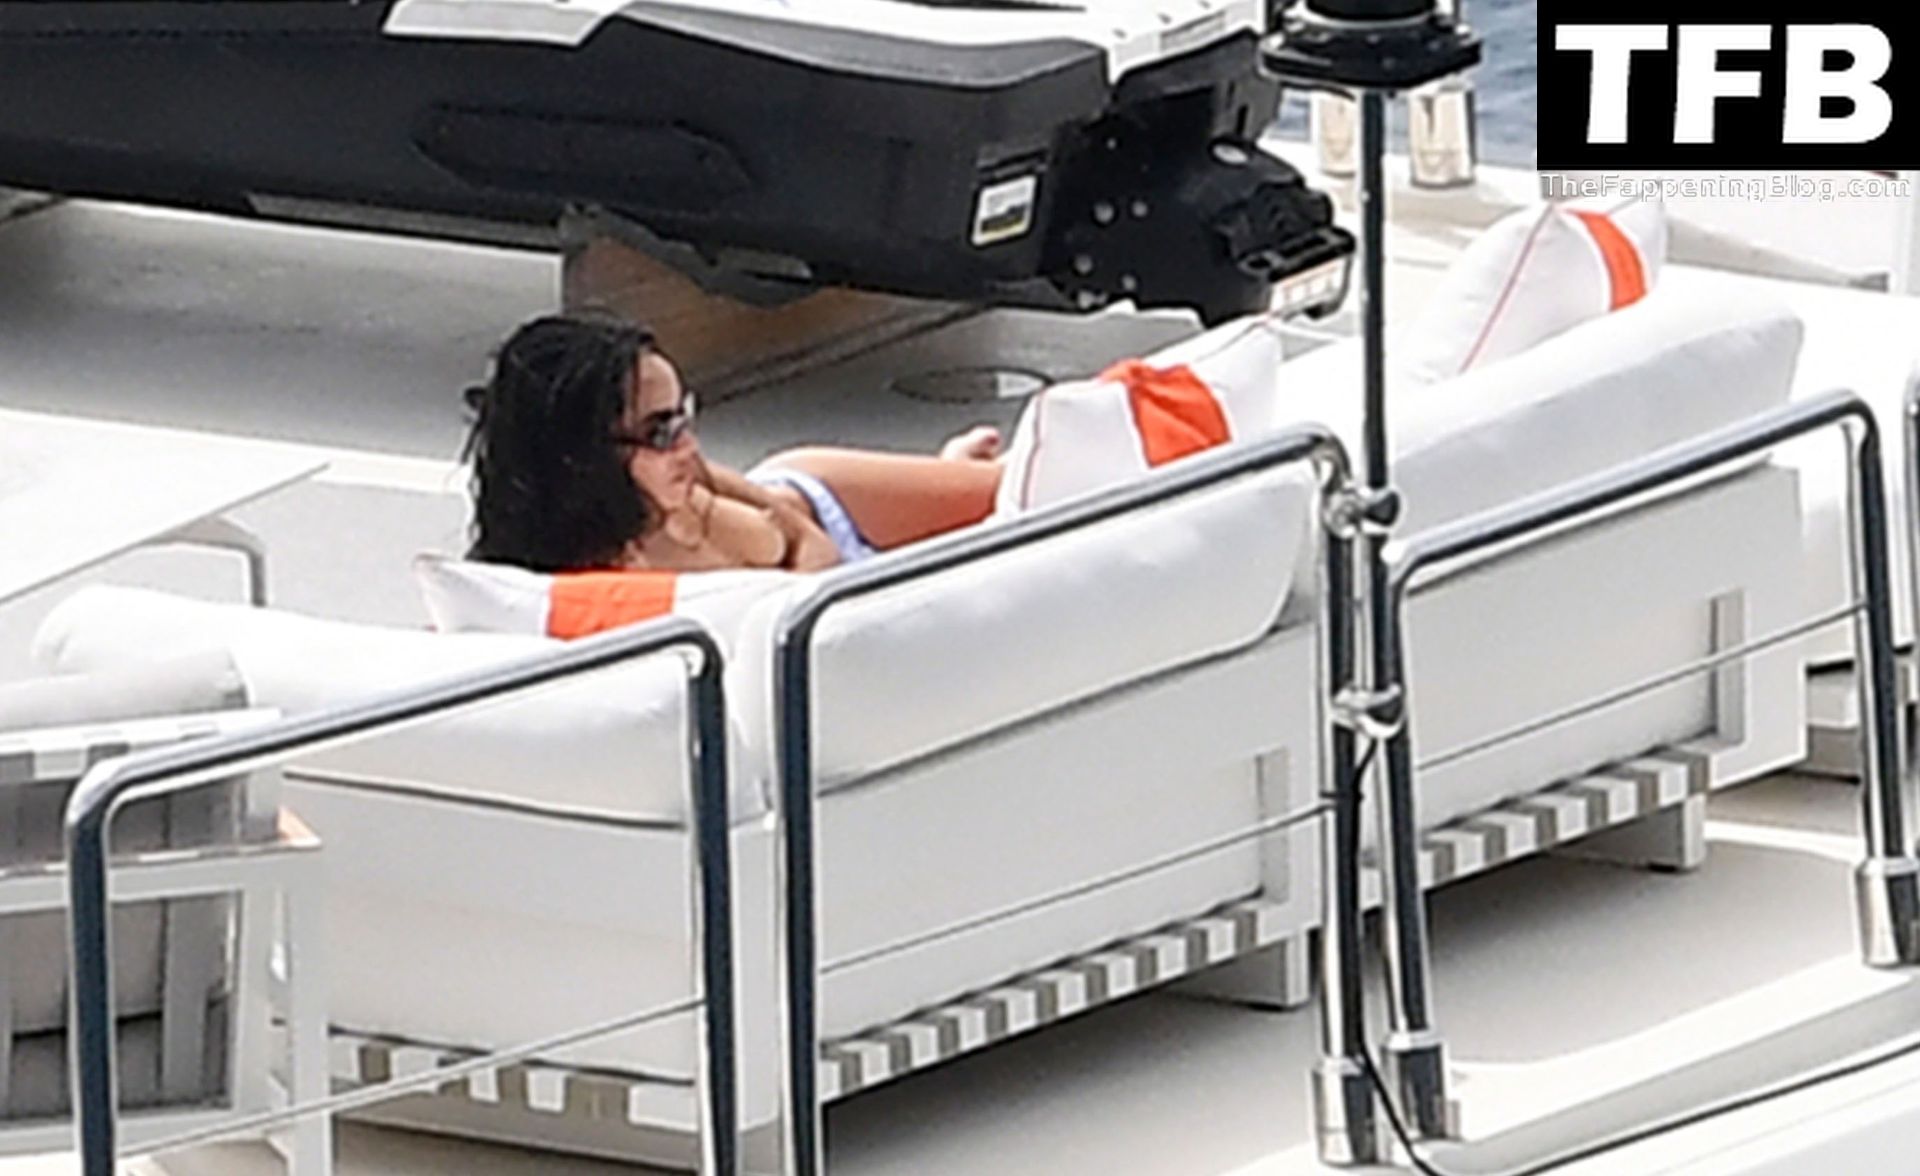 Zoe Kravitz Goes Topless While Enjoying a Summer Holiday on a Luxury Yacht in Positano (12 Photos)